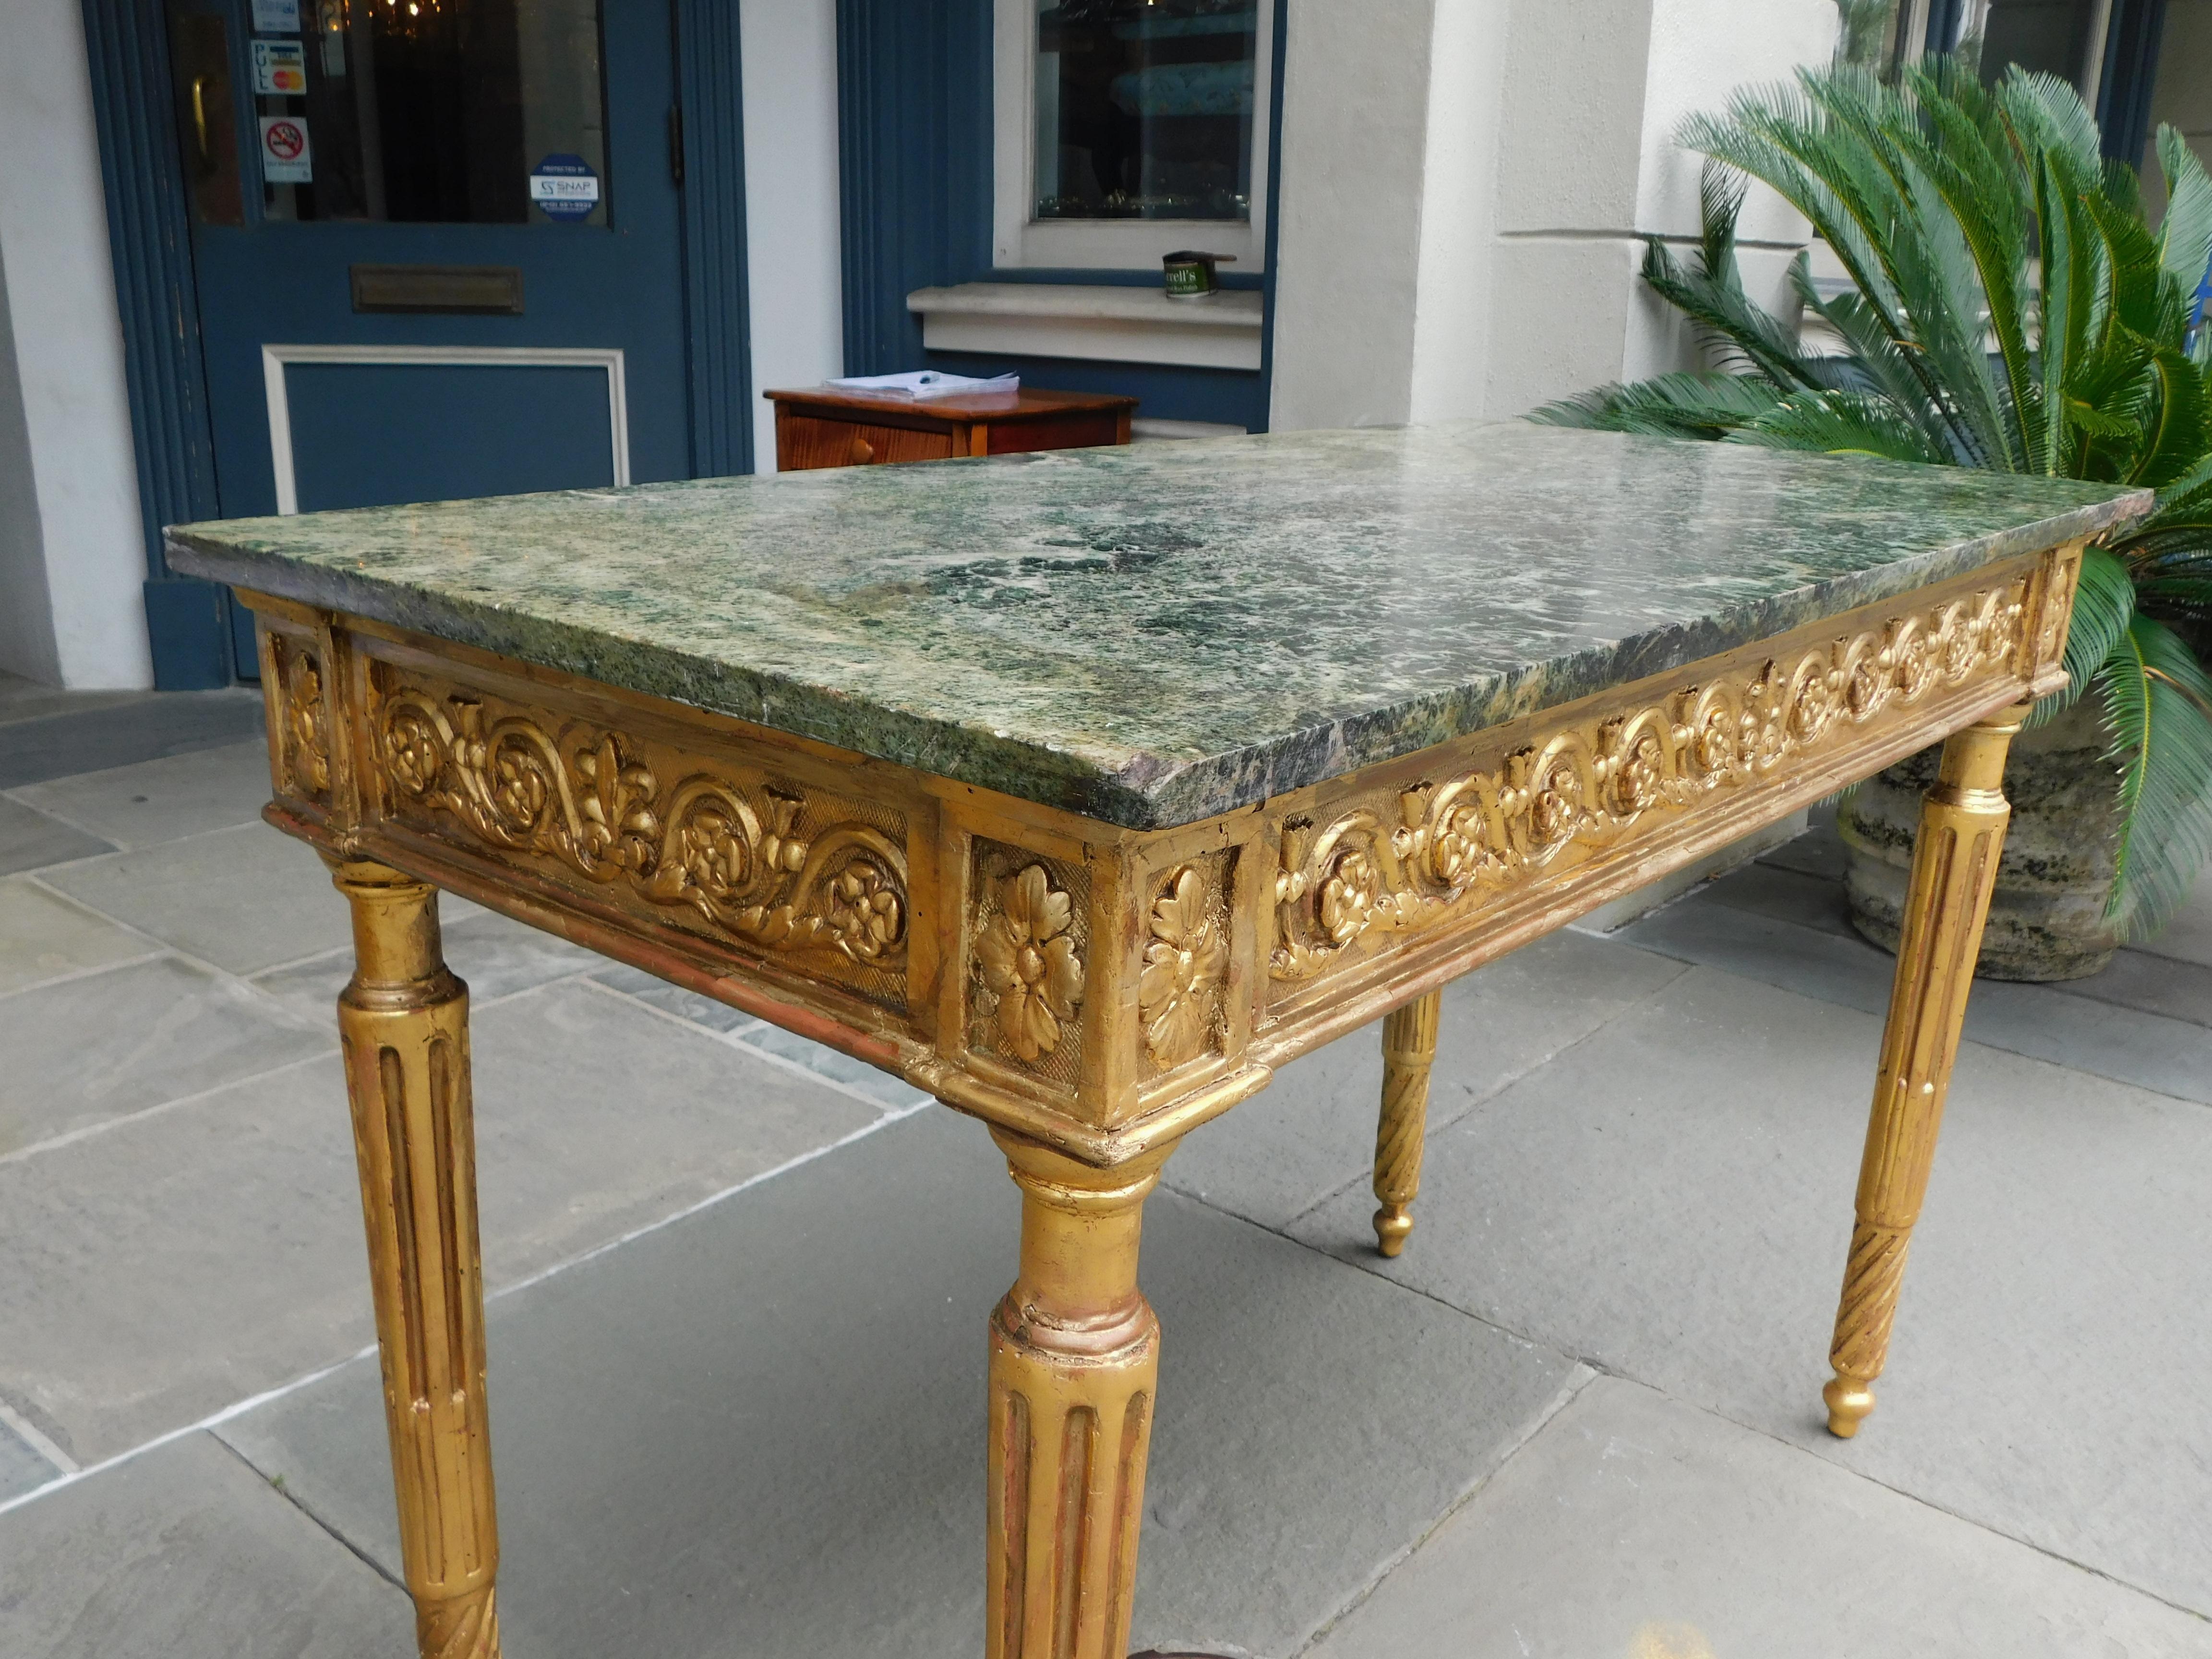 Italian Gilt Wood Marble Top Foliage Console Table with Fluted Legs, Circa 1770 For Sale 1